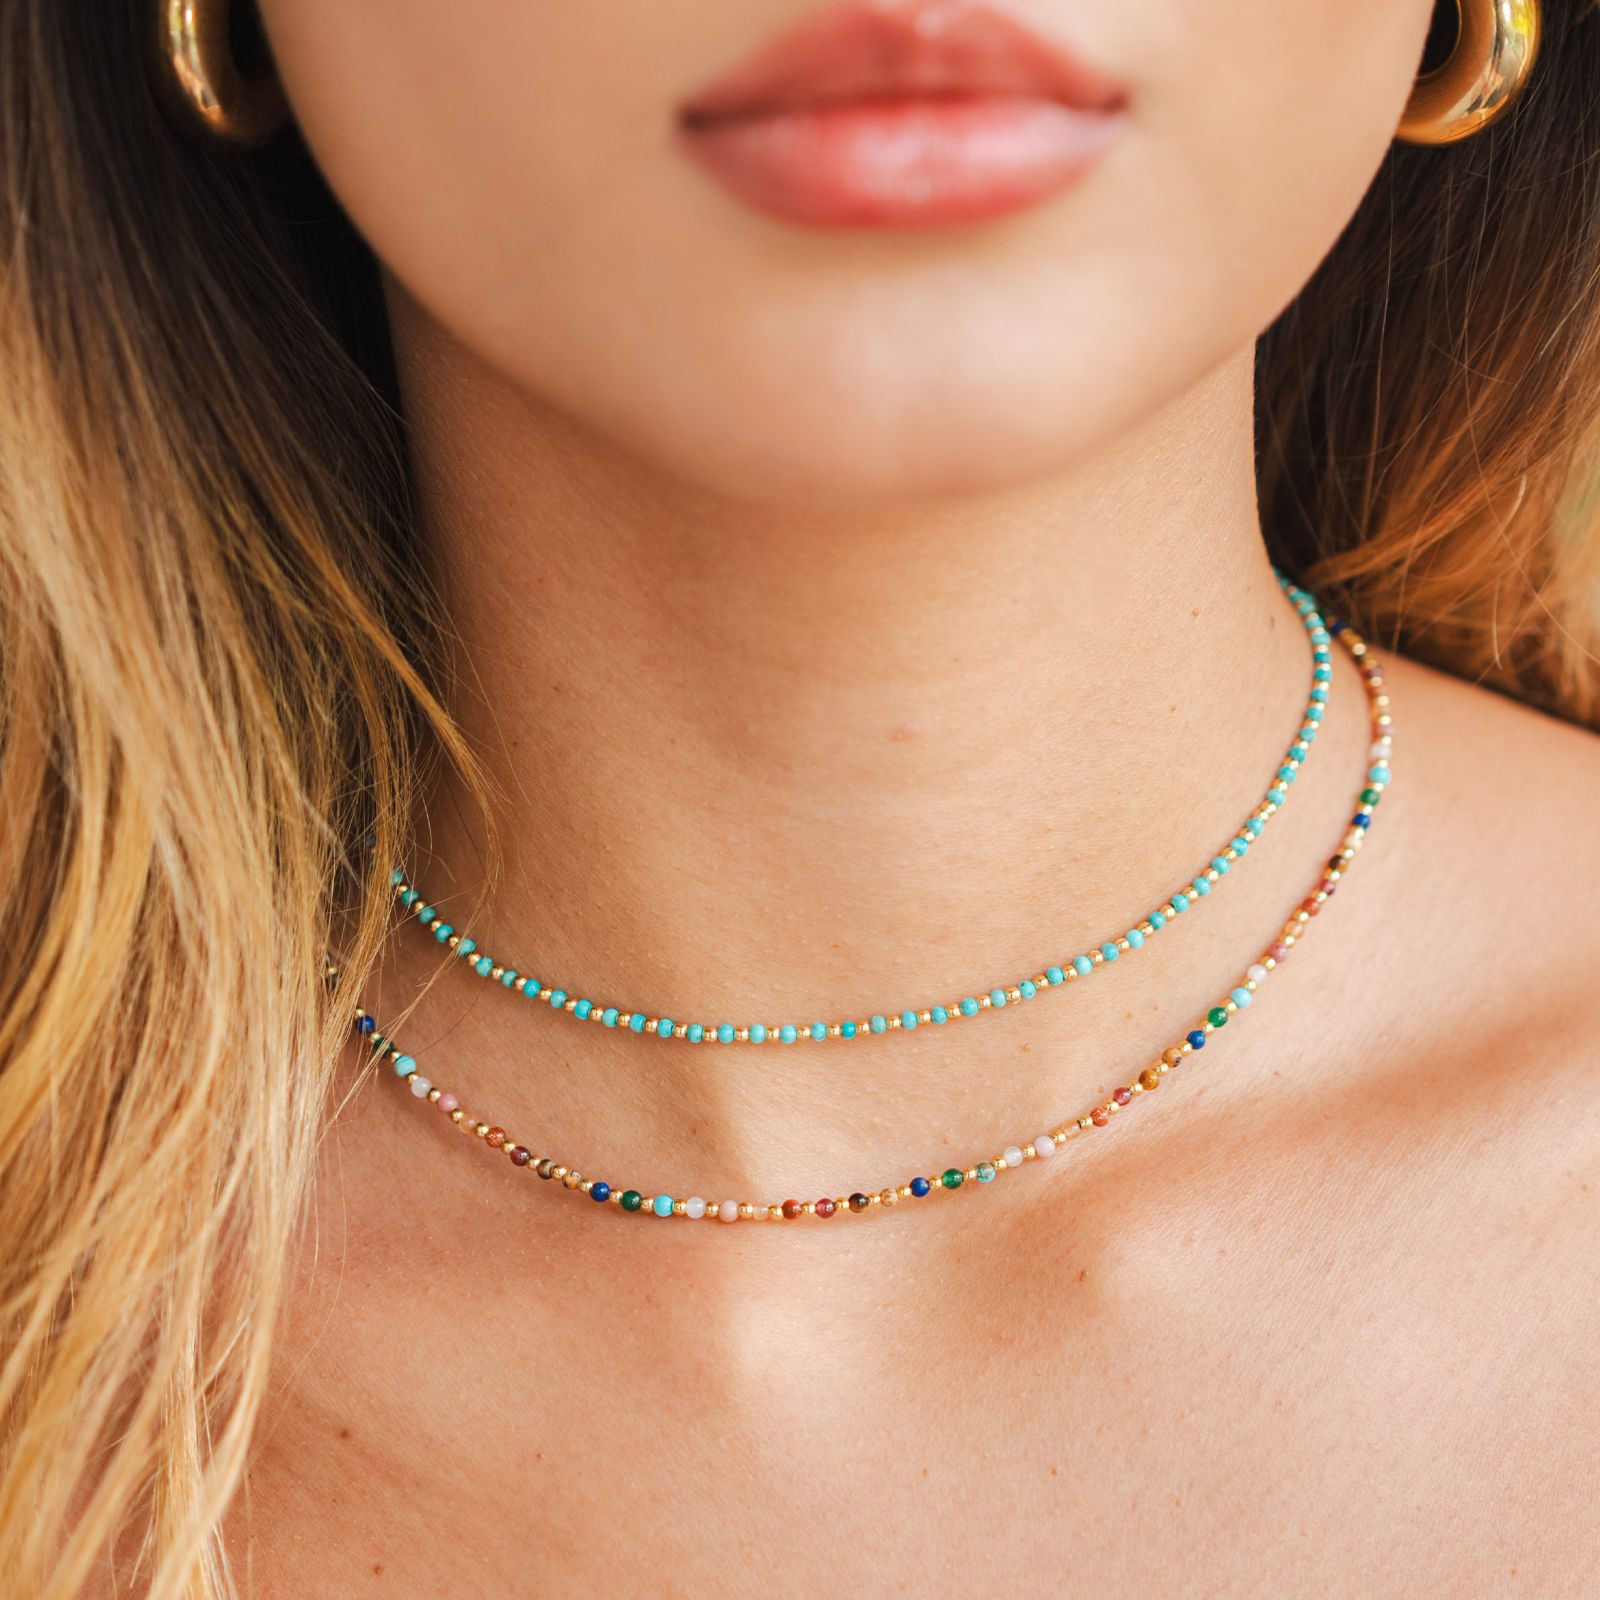 Model wearing a stack of two healing necklaces. The necklaces include a 2mm multicolor stone and gold bead healing necklace and a 2mm turquoise stone and gold bead healing necklace